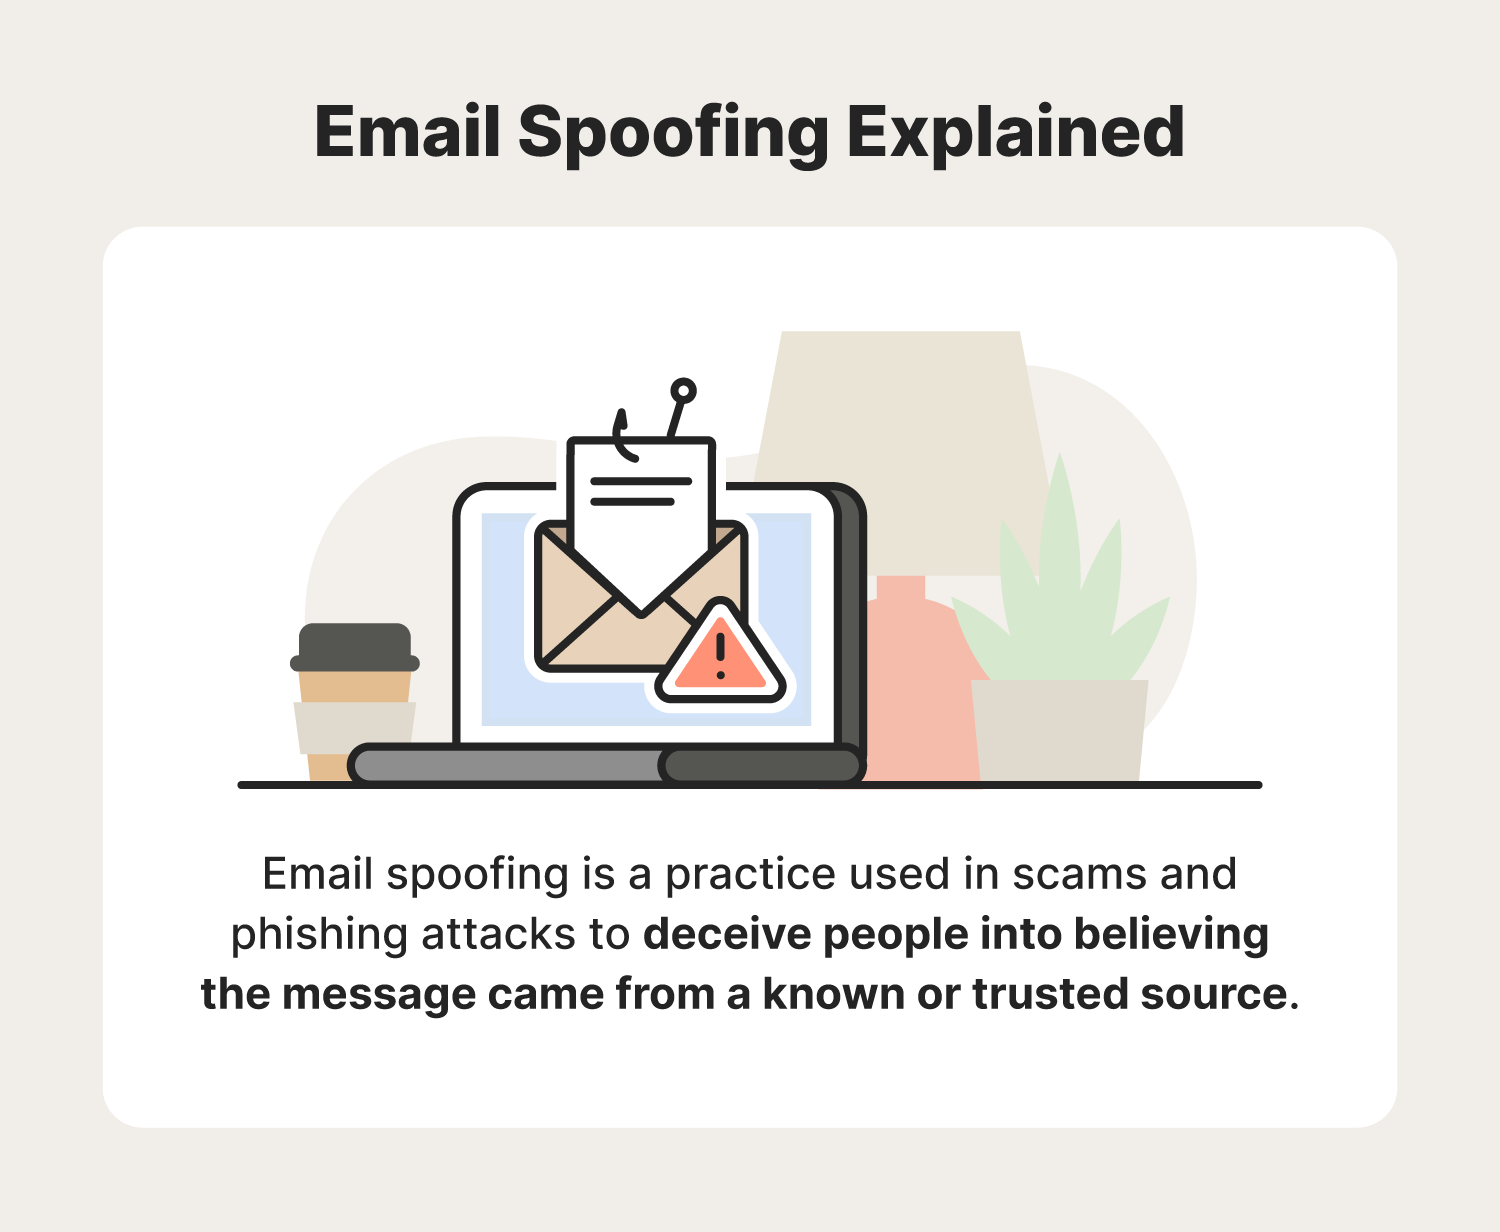 A graphic defines email spoofing, a common practice utilized in scams and phishing attacks.